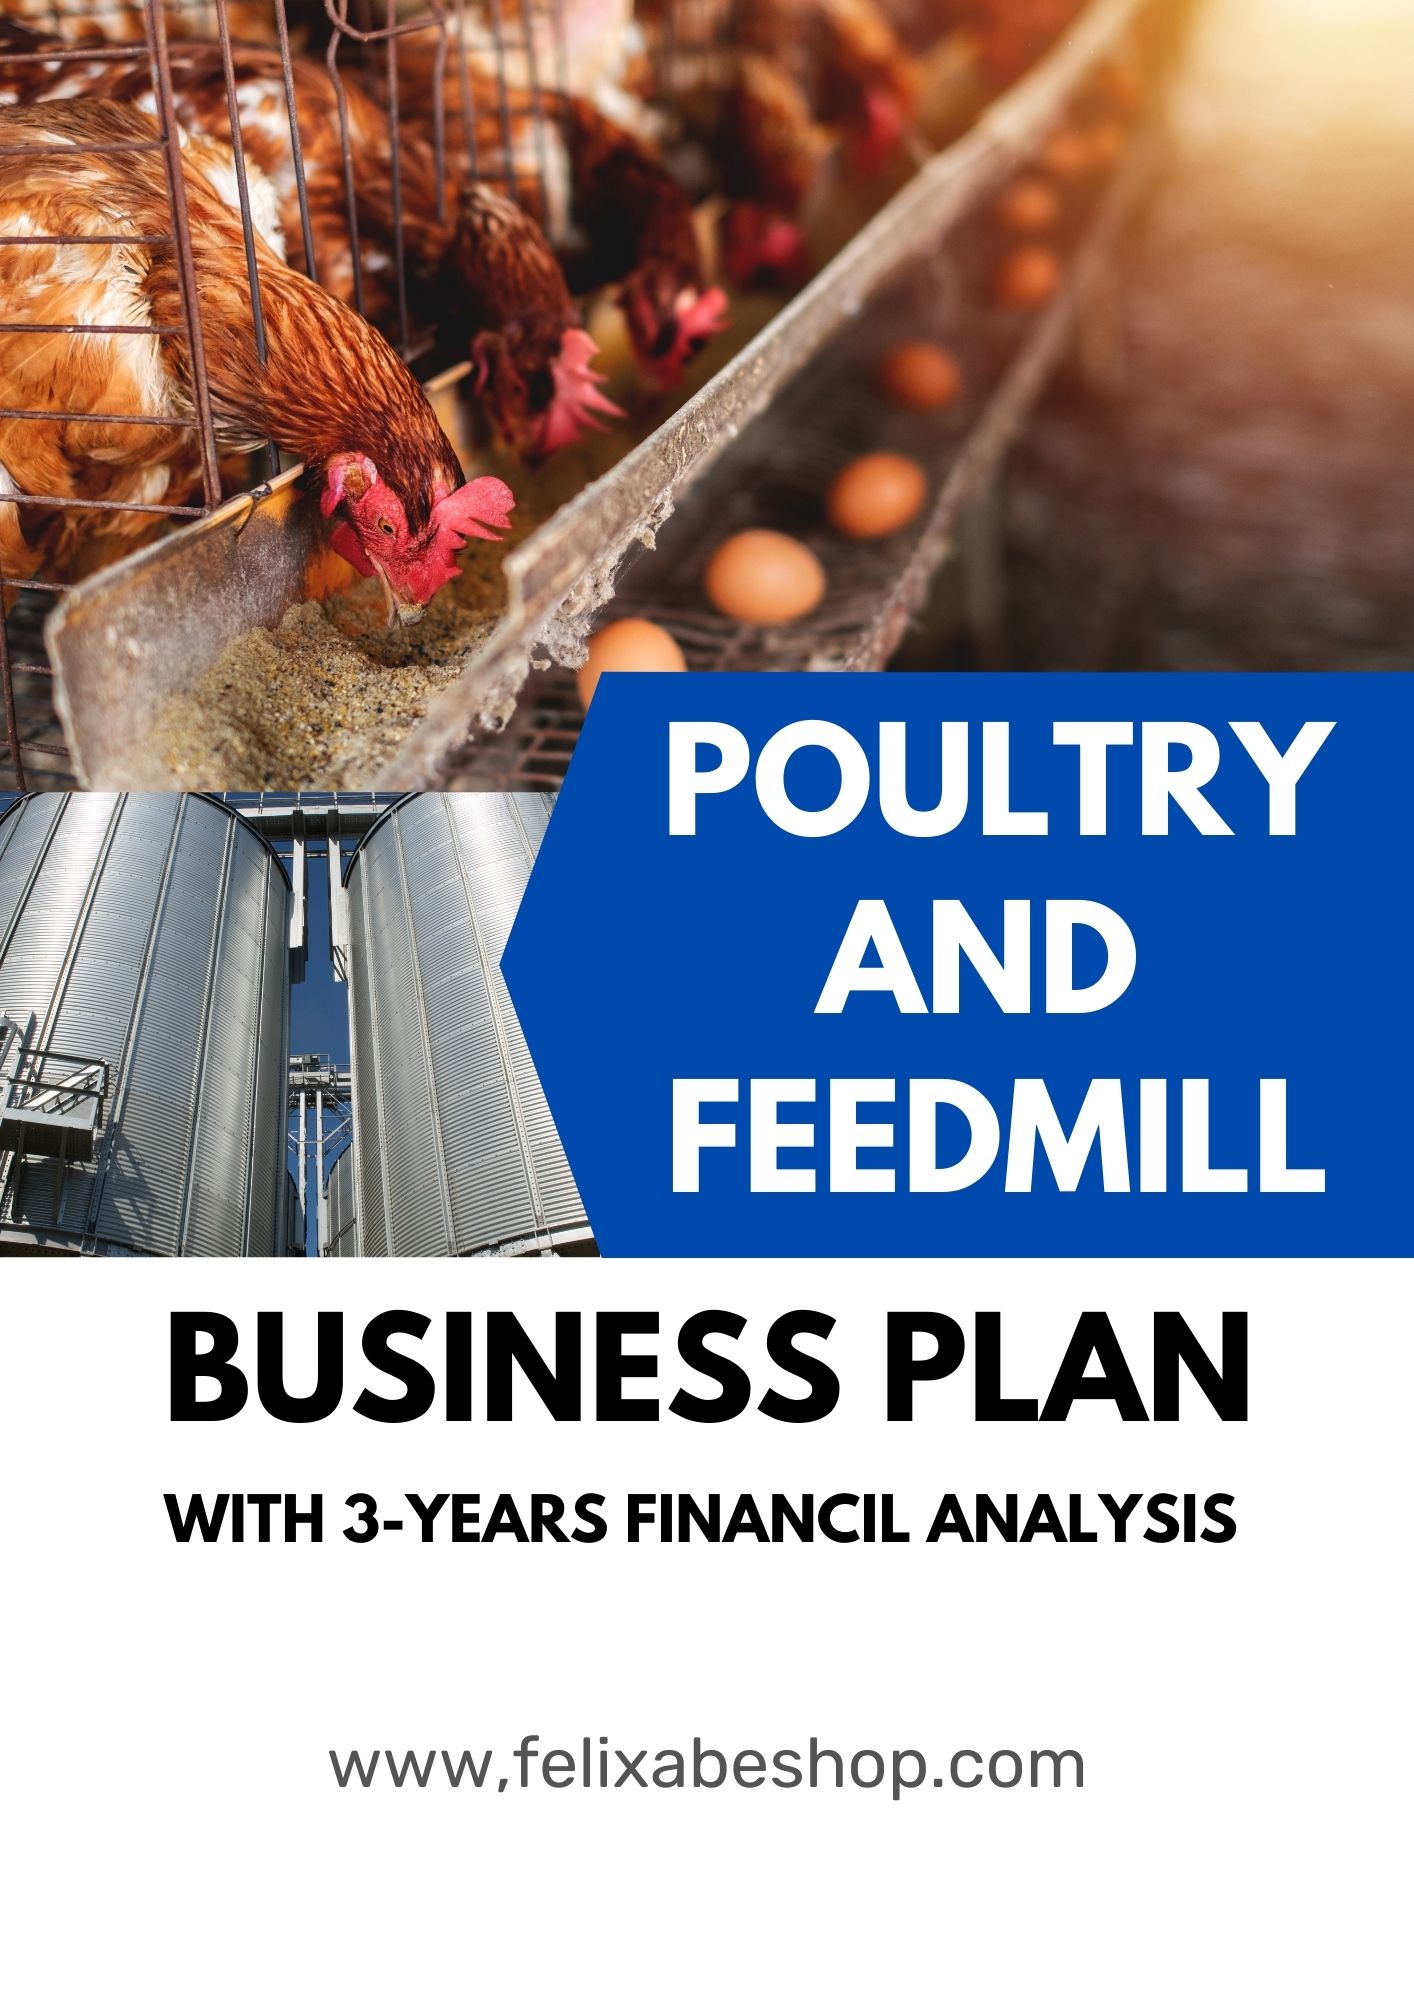 business plan on poultry production